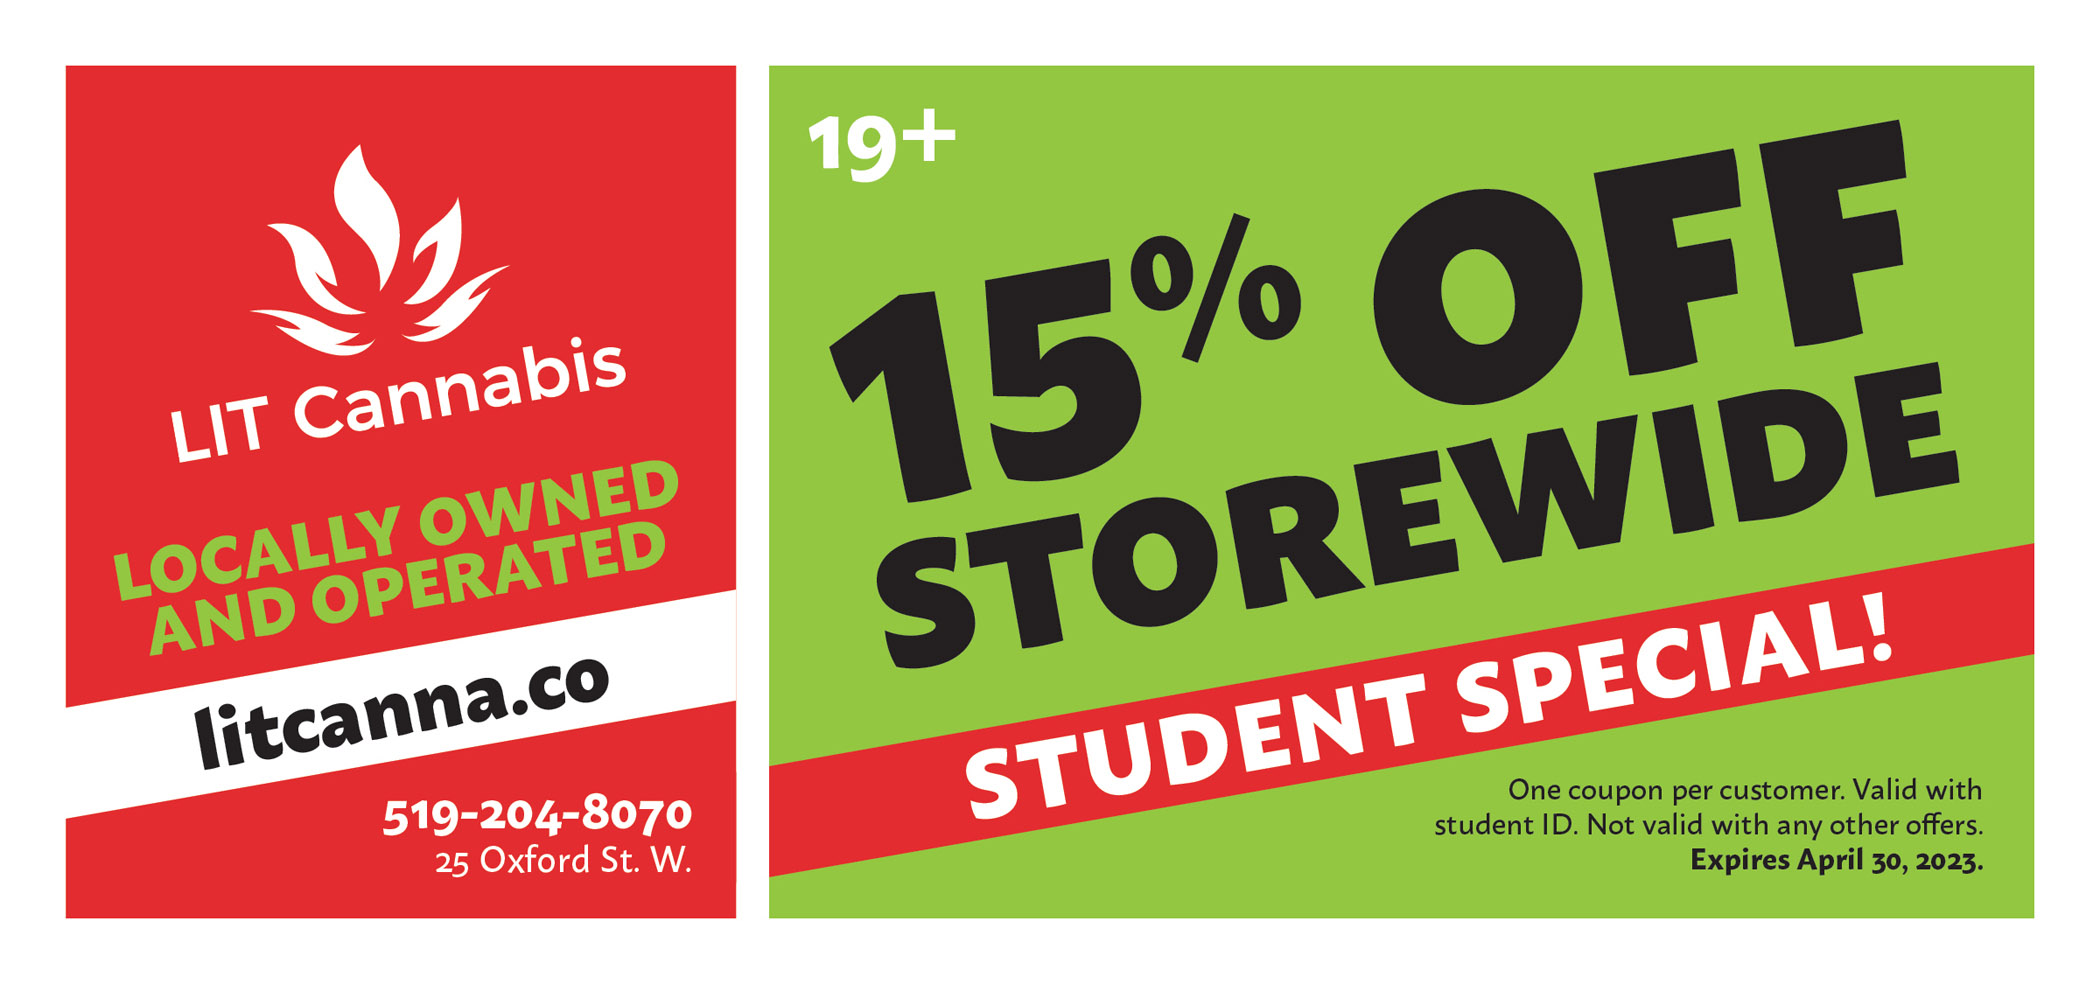 (19+) 15% off storewide student special